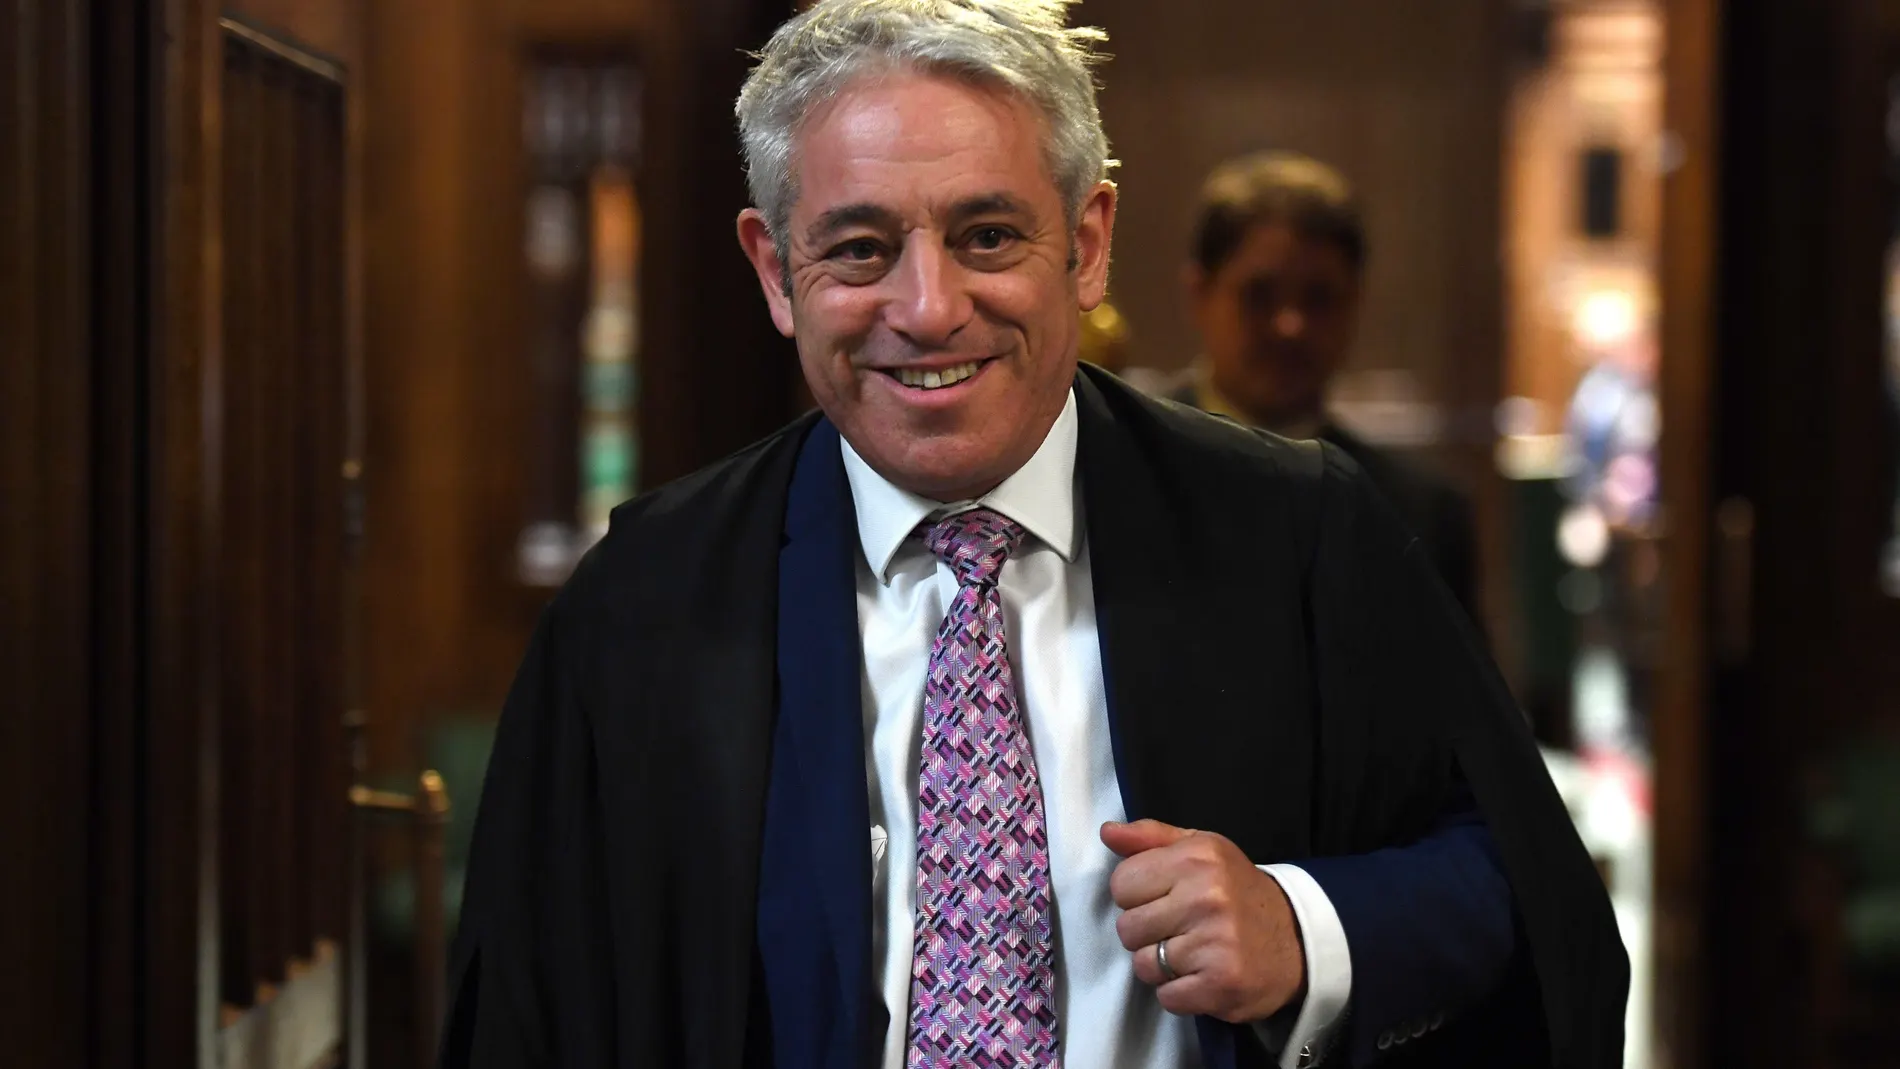 Speaker of the House of Commons John Bercow's final day at work